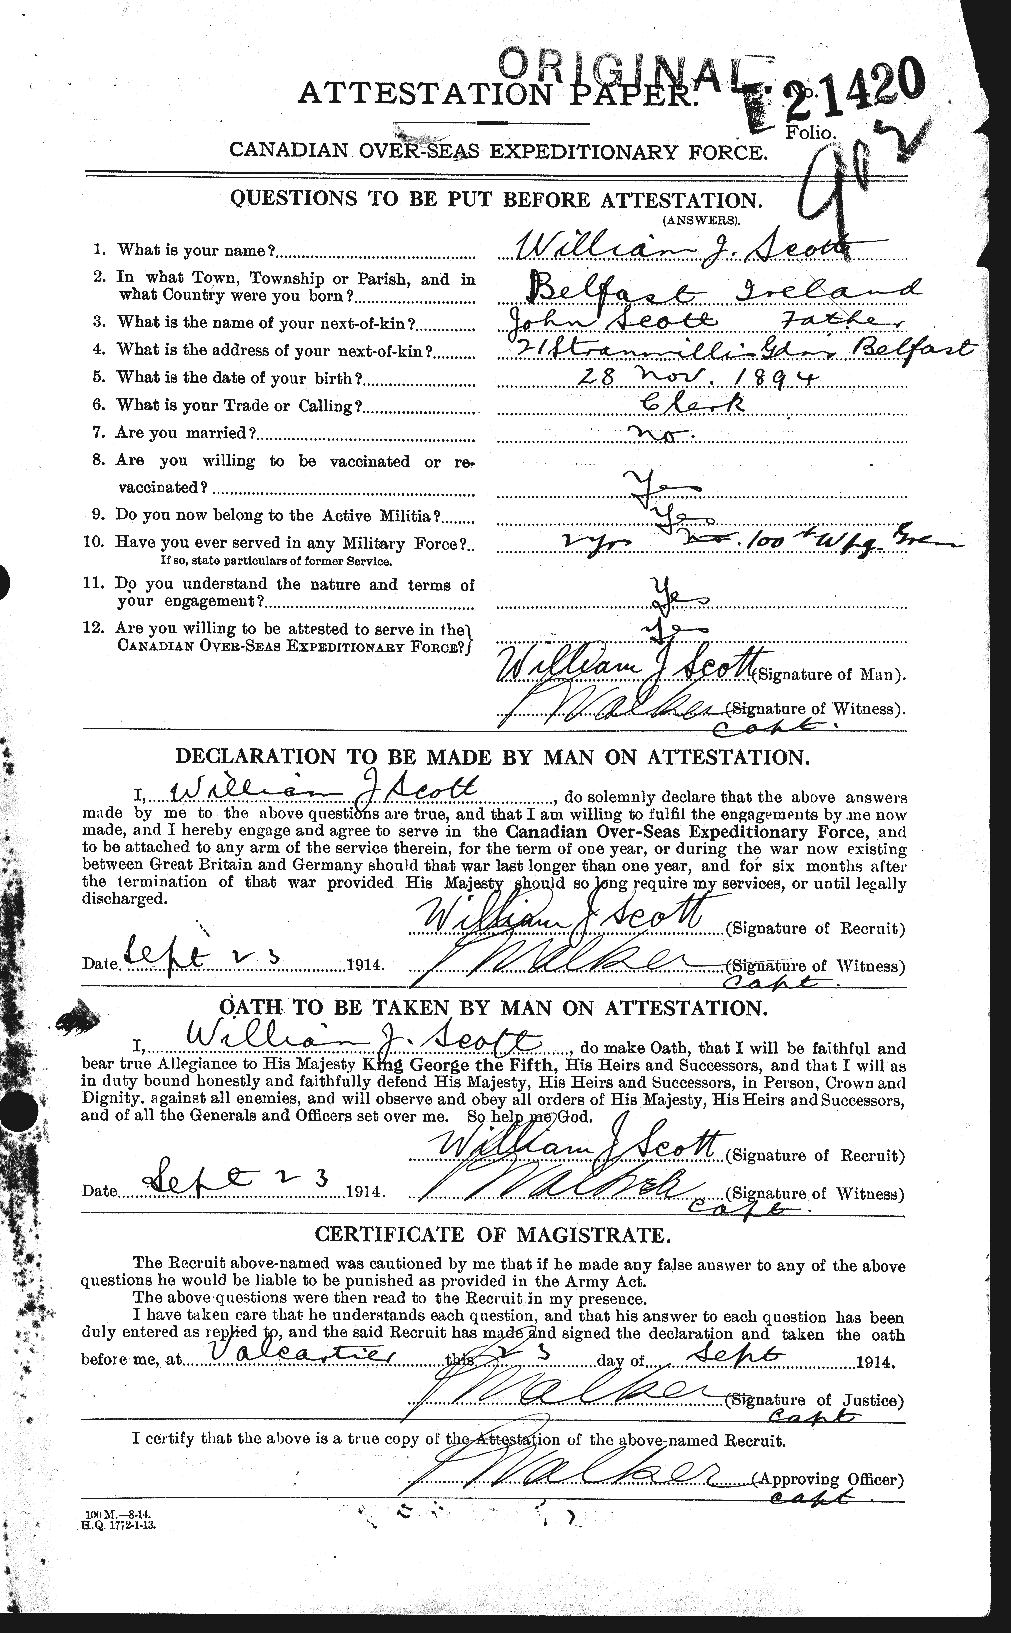 Personnel Records of the First World War - CEF 086775a